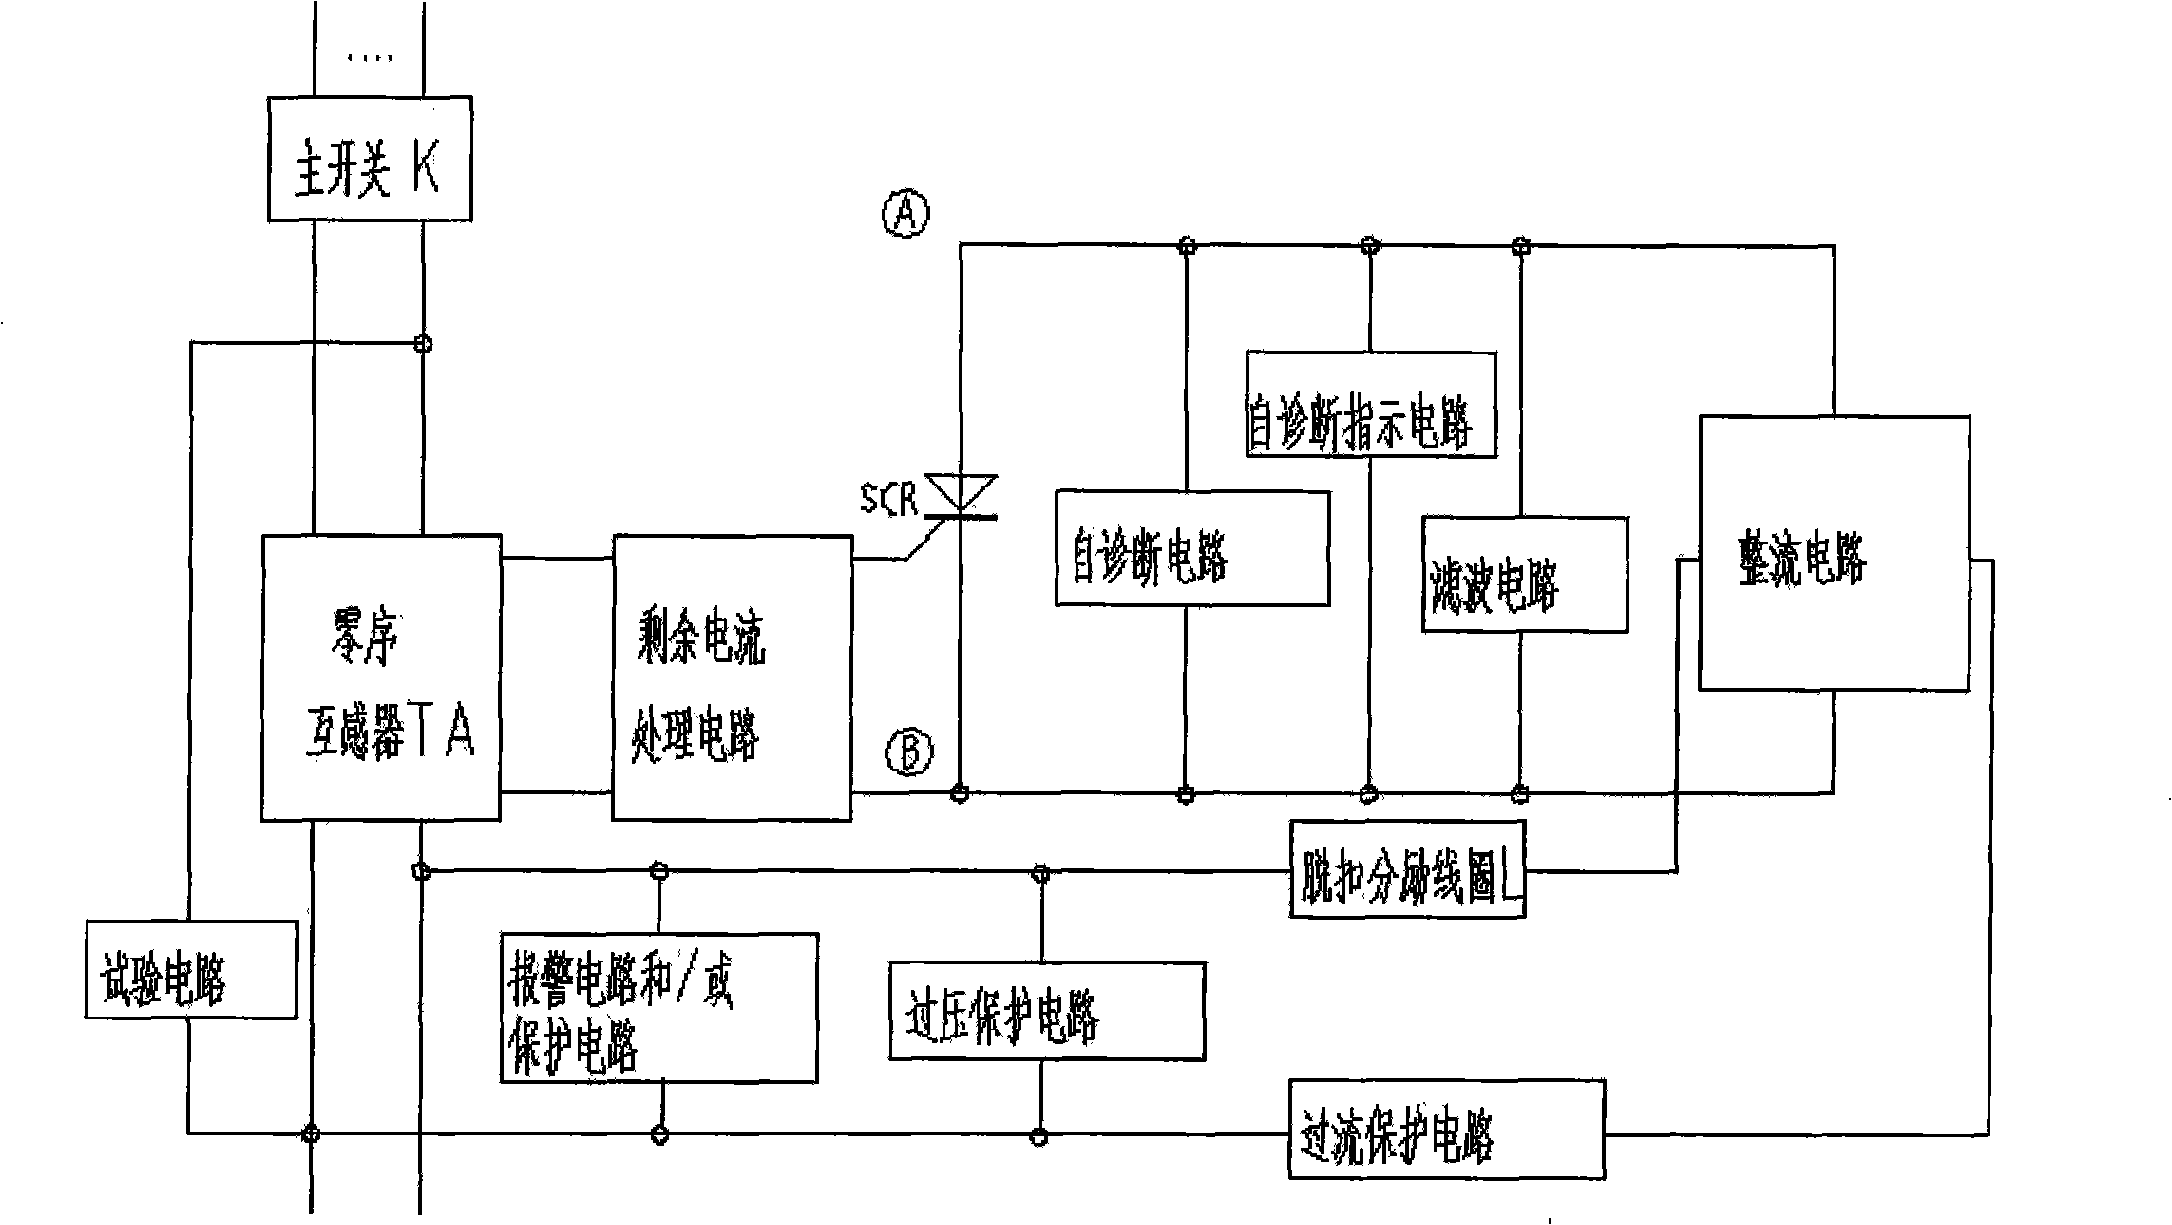 Aftercurrent action protector with self-diagnostic function